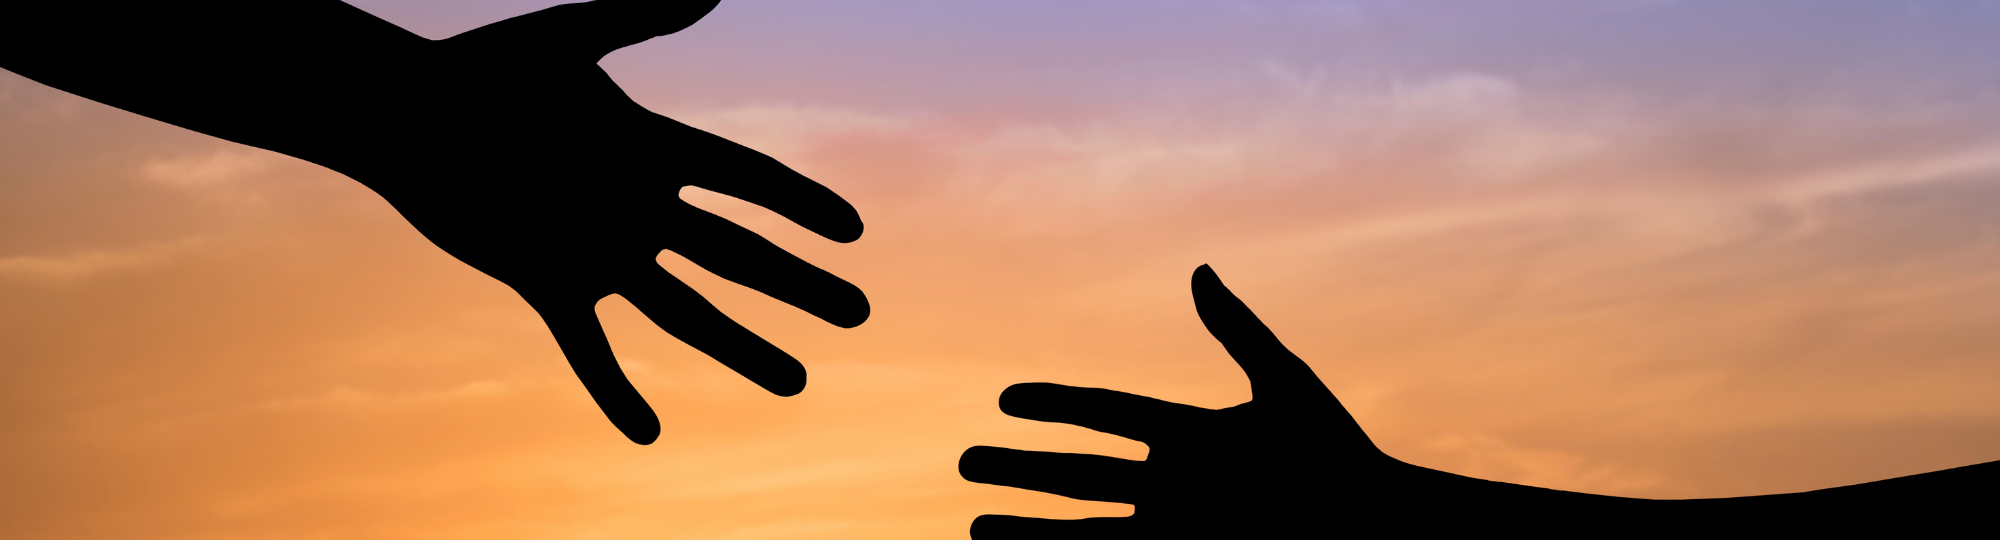 A helping hand reaches for another hand, silhouetted against a sunrise sky